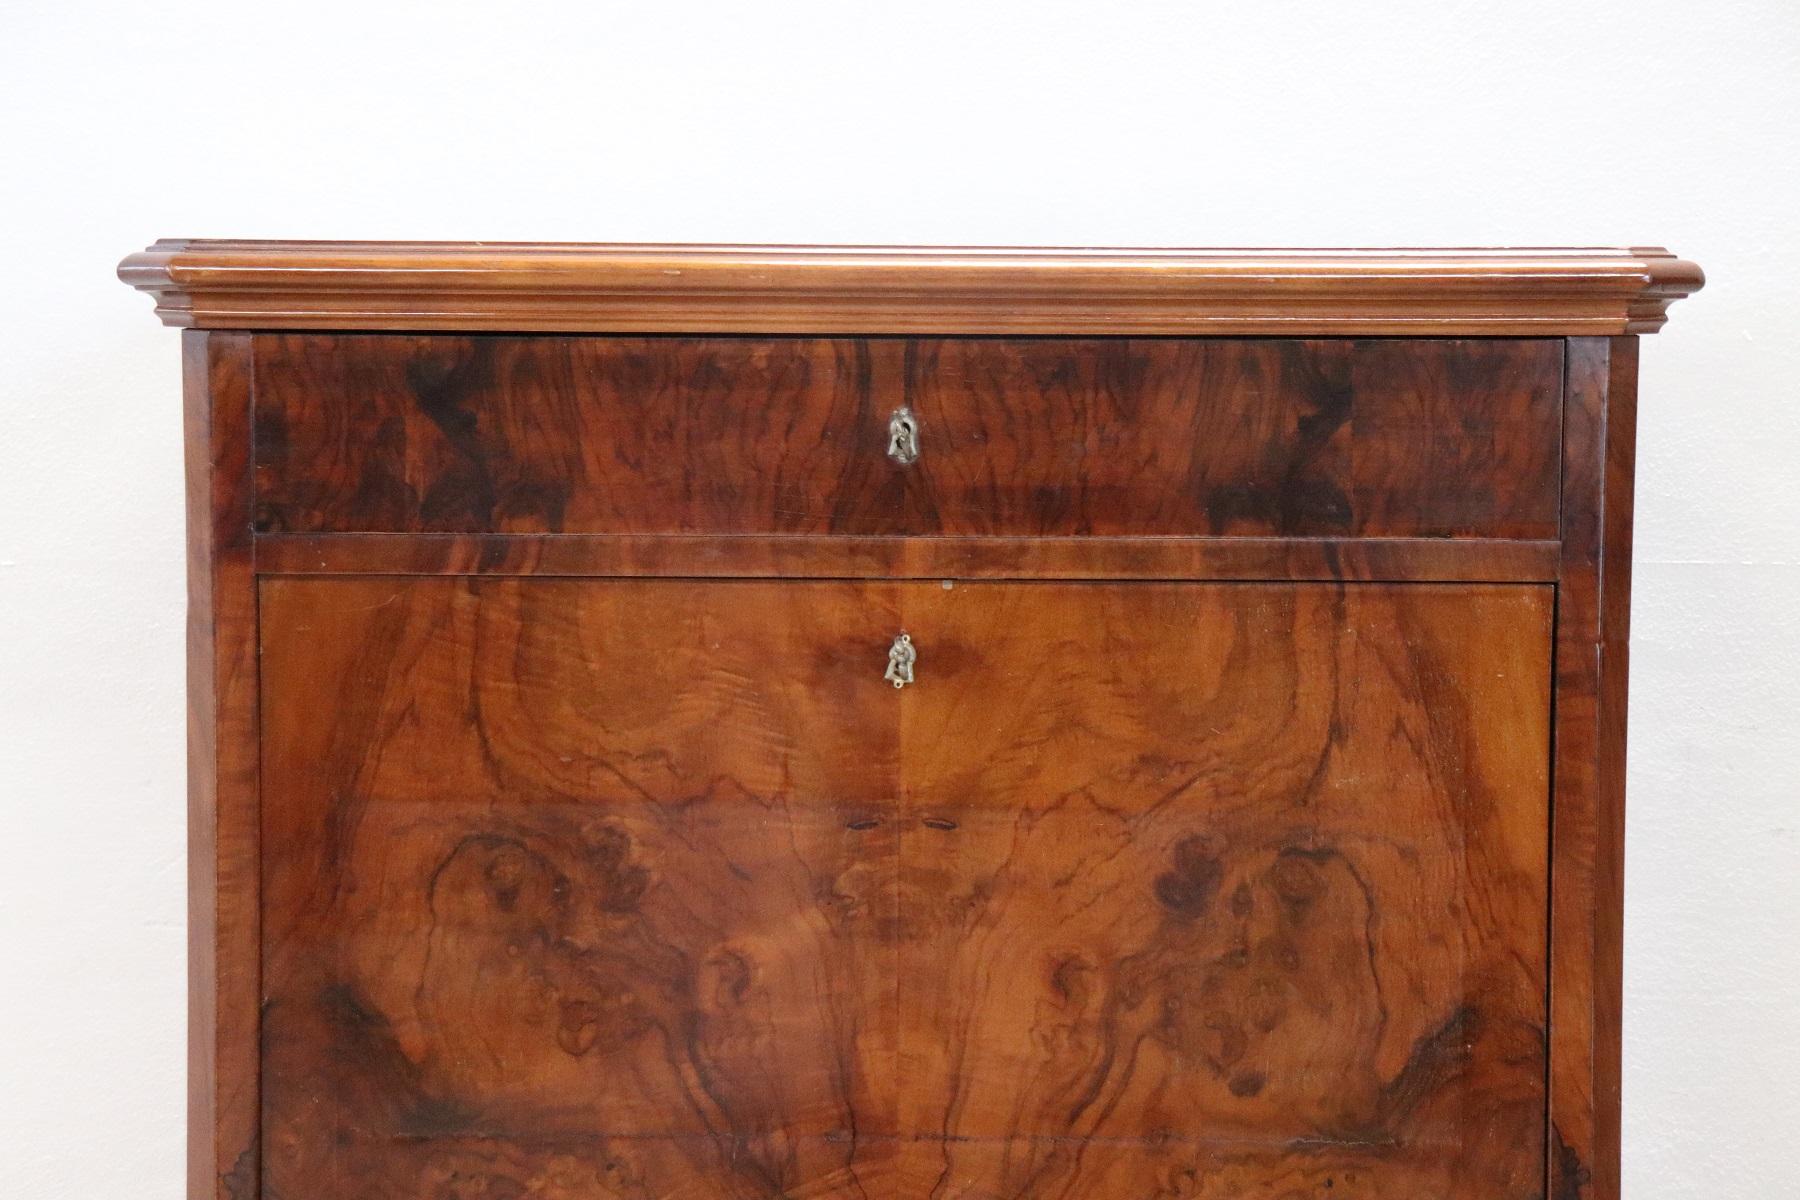 Beautiful French secretary characterized by a beautiful walnut veneer. Note the wood grain that draws a beautiful flame on the front. The plan opens and becomes a practical desk. Internally many useful drawers and an internal secret visible in